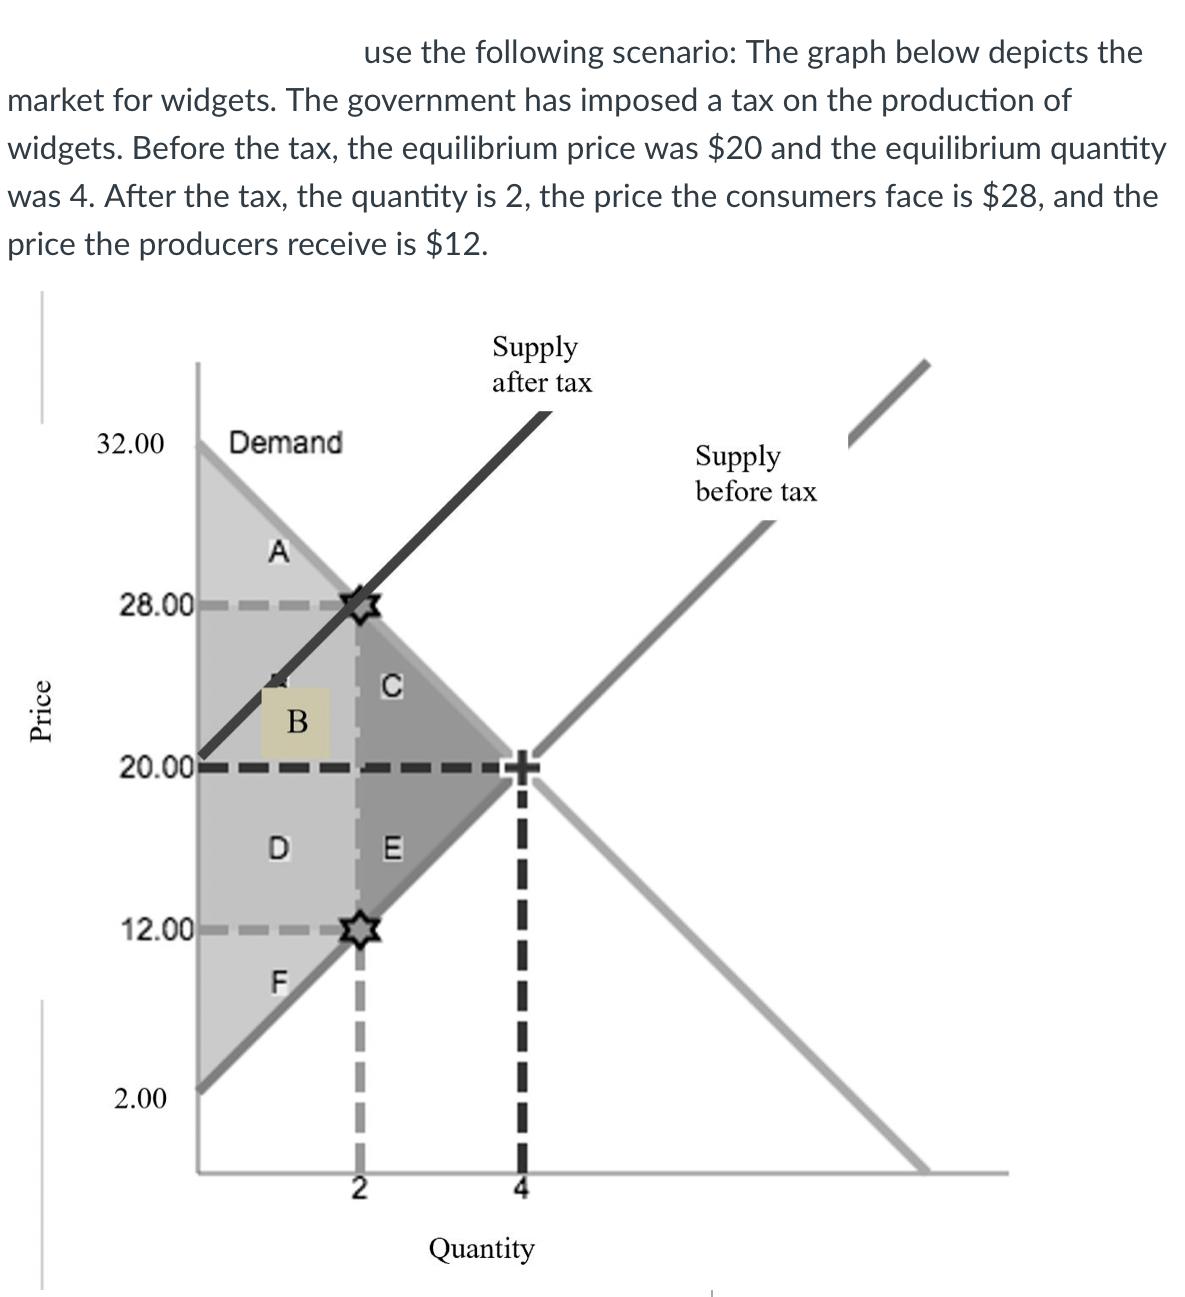 use the following scenario: The graph below depicts the market for widgets. The government has imposed a tax